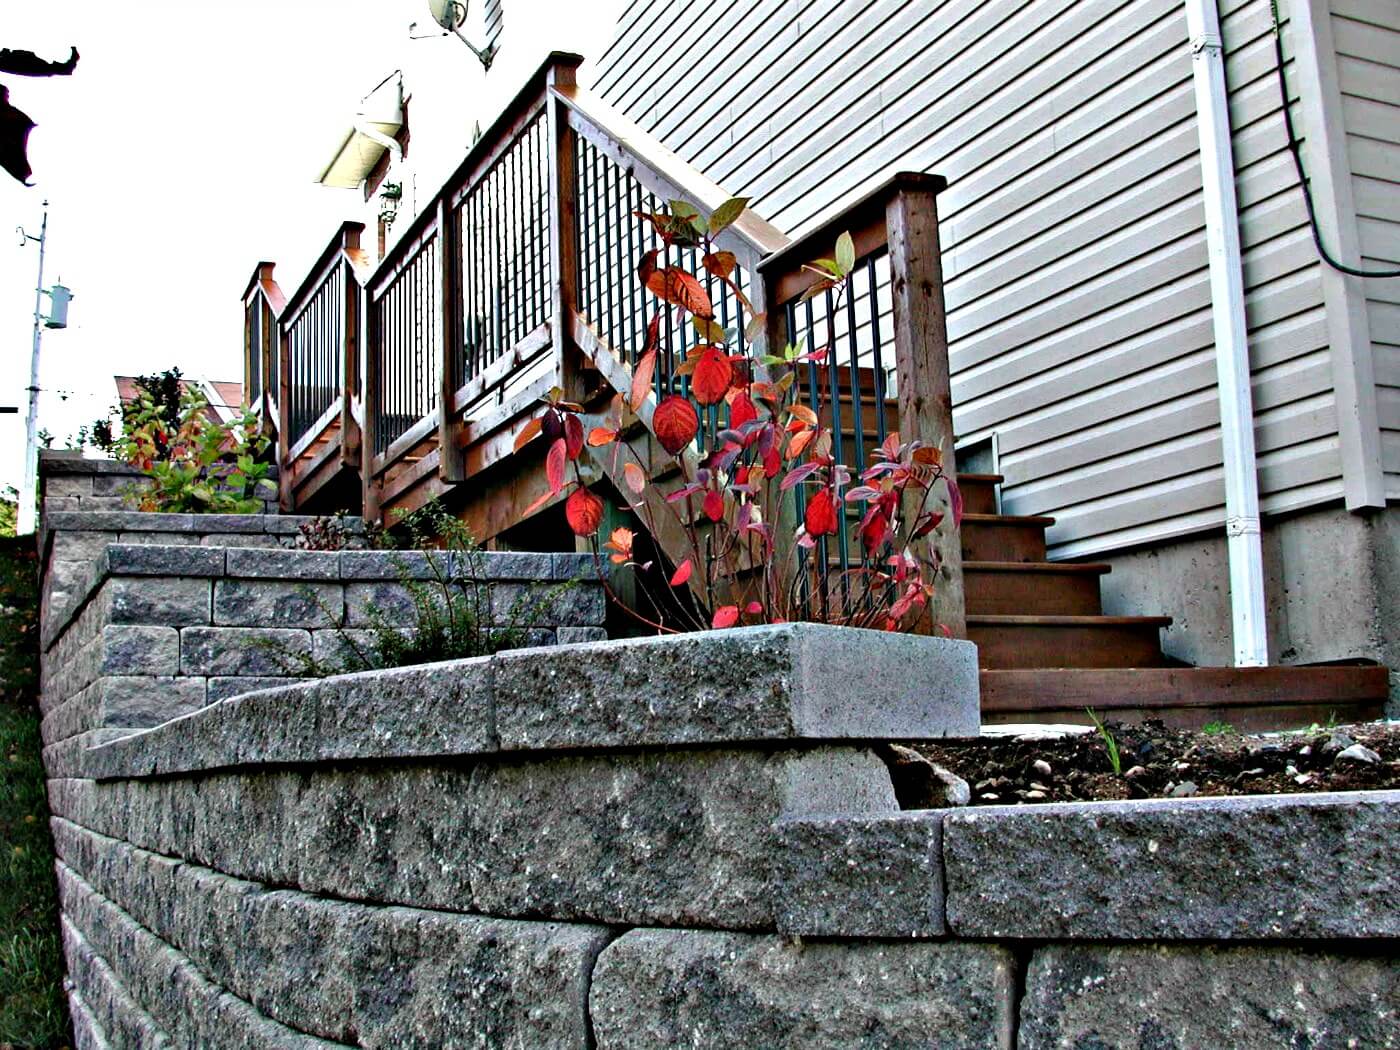 Stairs to Deck With Planters And Stone Walls